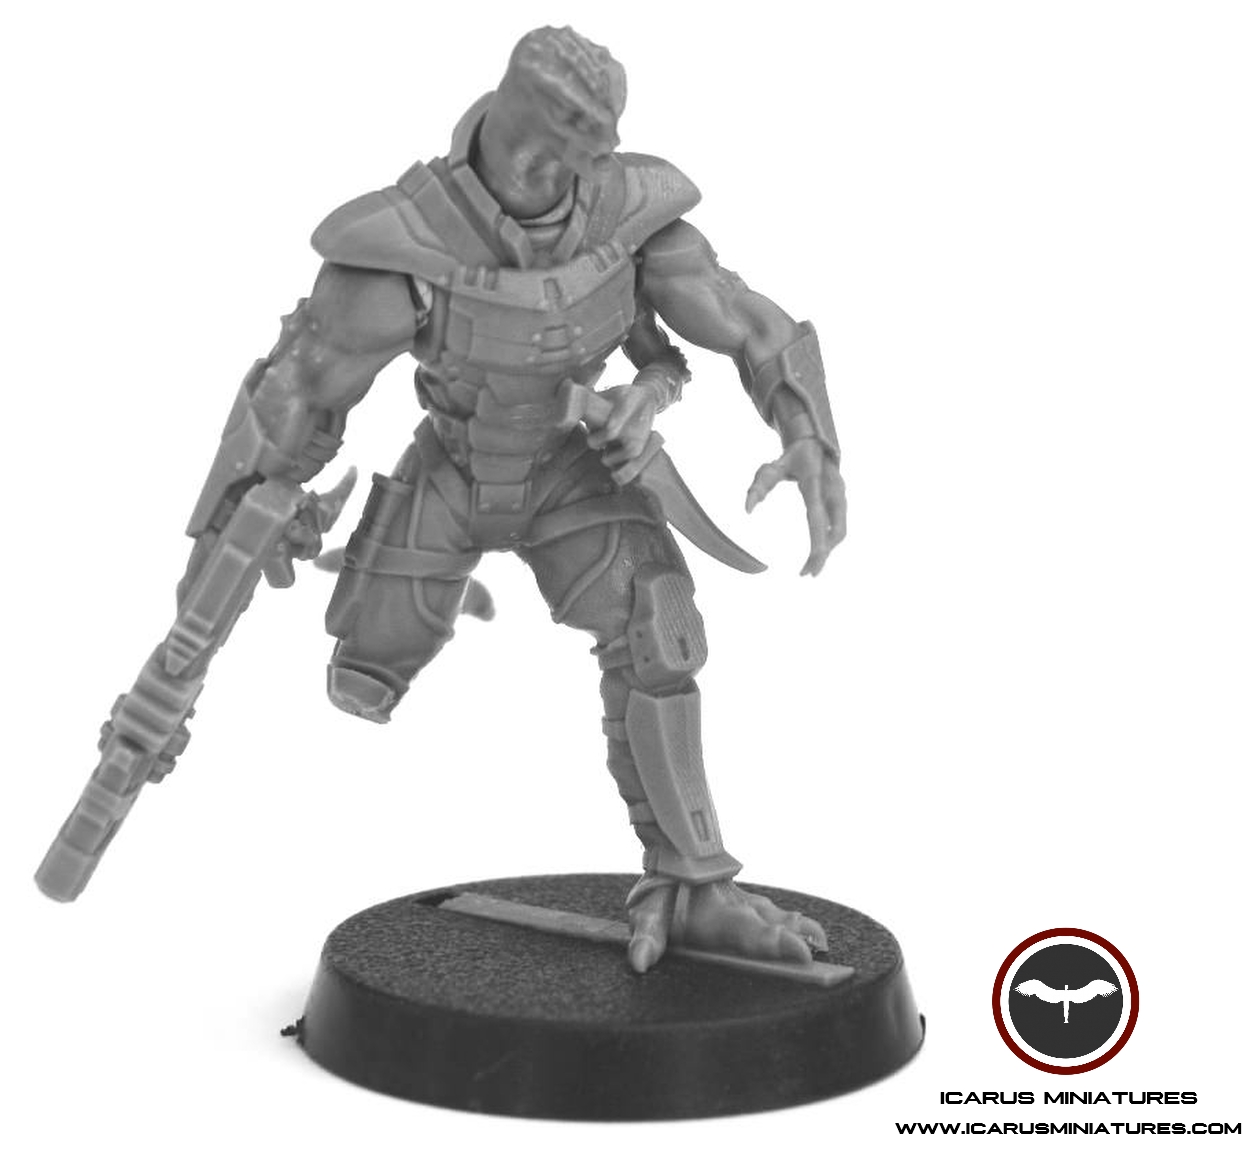 New Releases from Icarus Miniatures